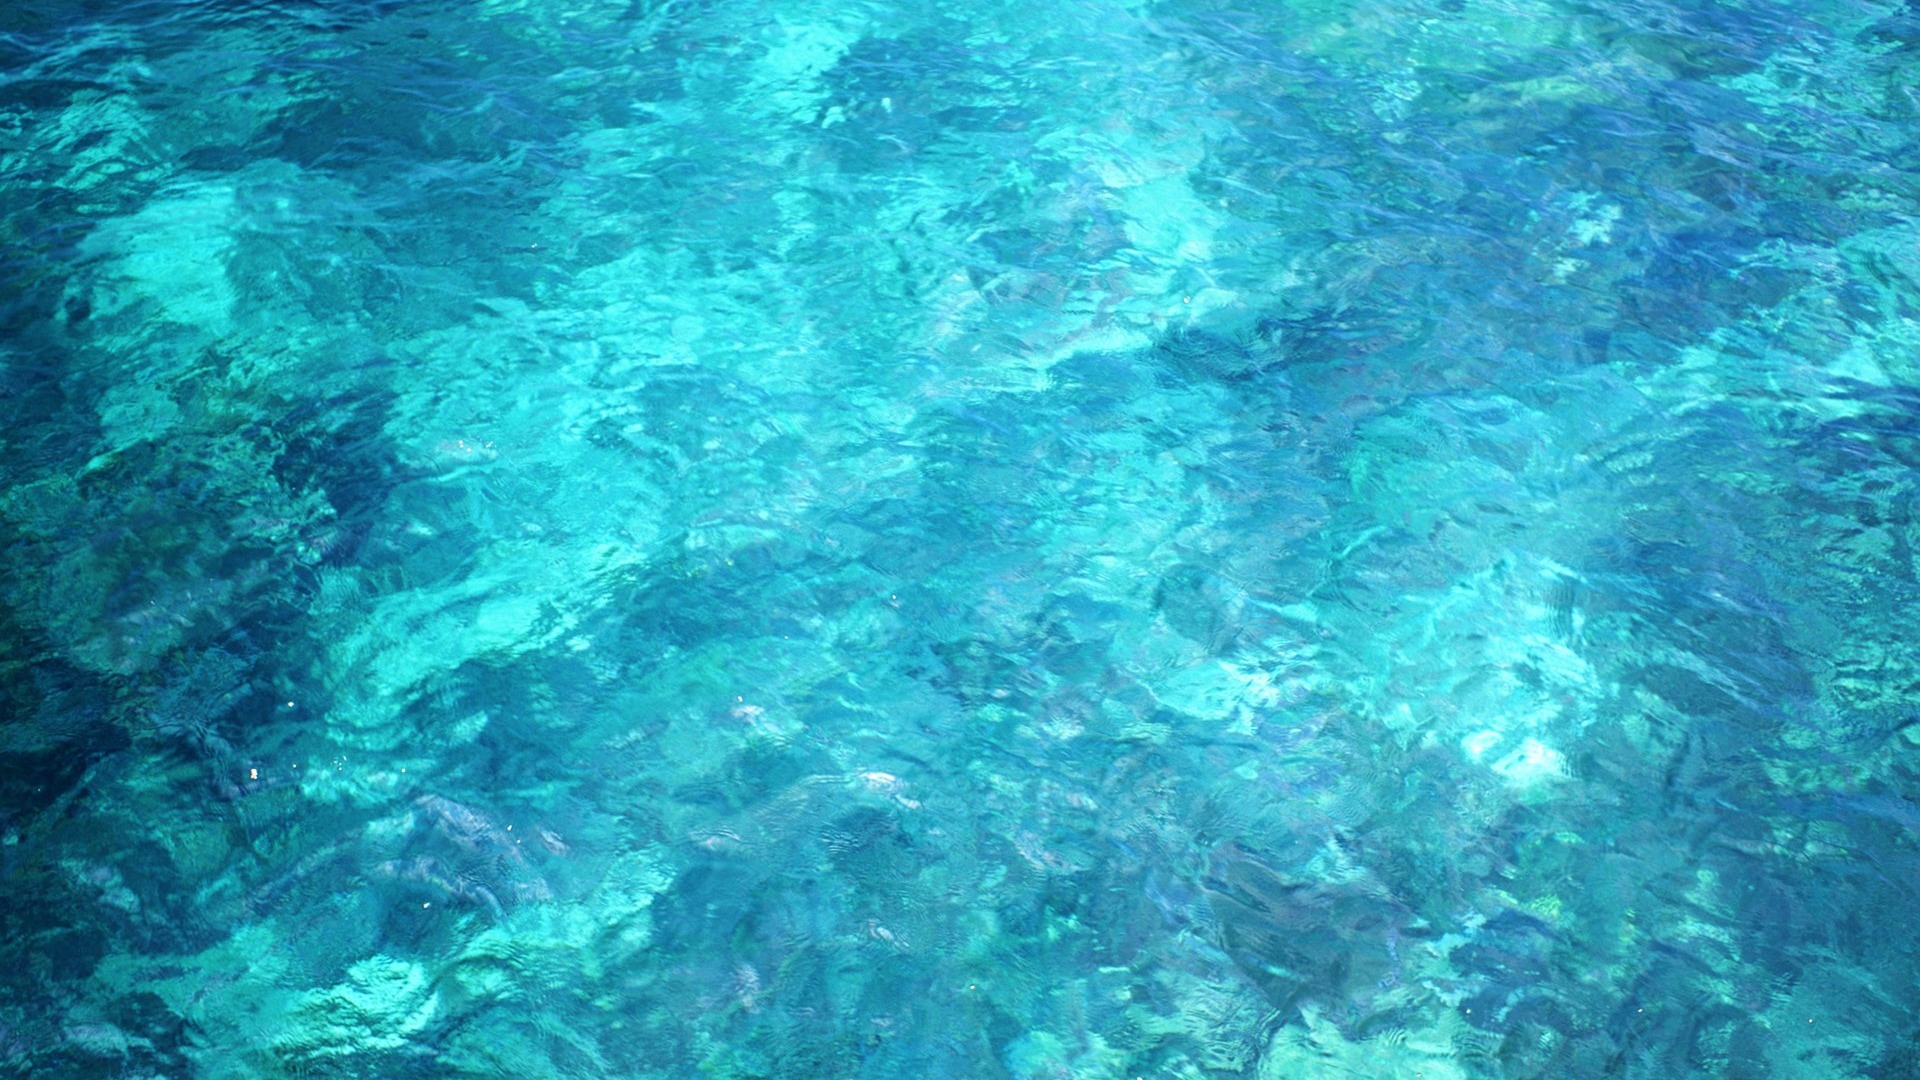 Bali With Crystal Clear Water Wallpaper